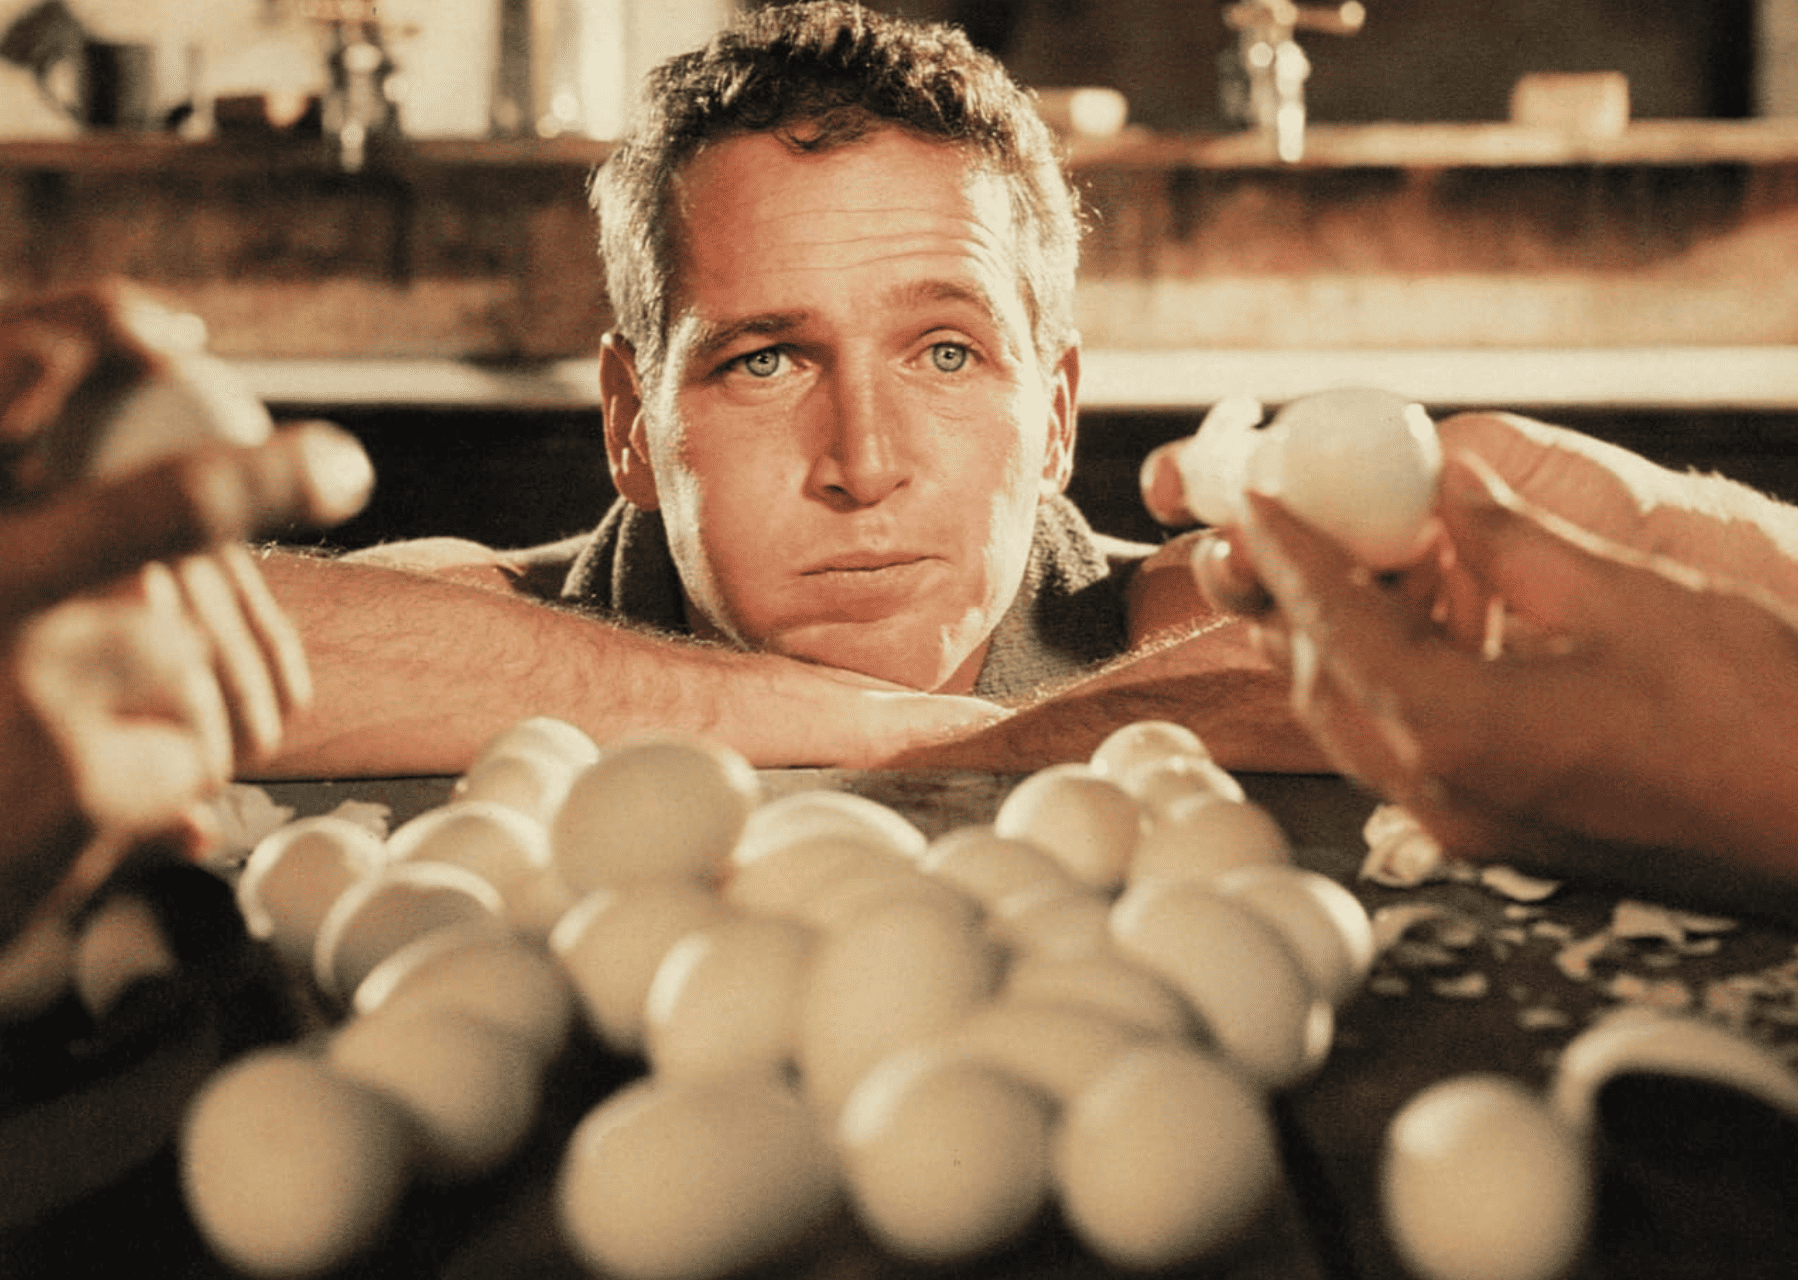 A man gazes at a pile of hard-boiled eggs in this image from Jalem Productions.